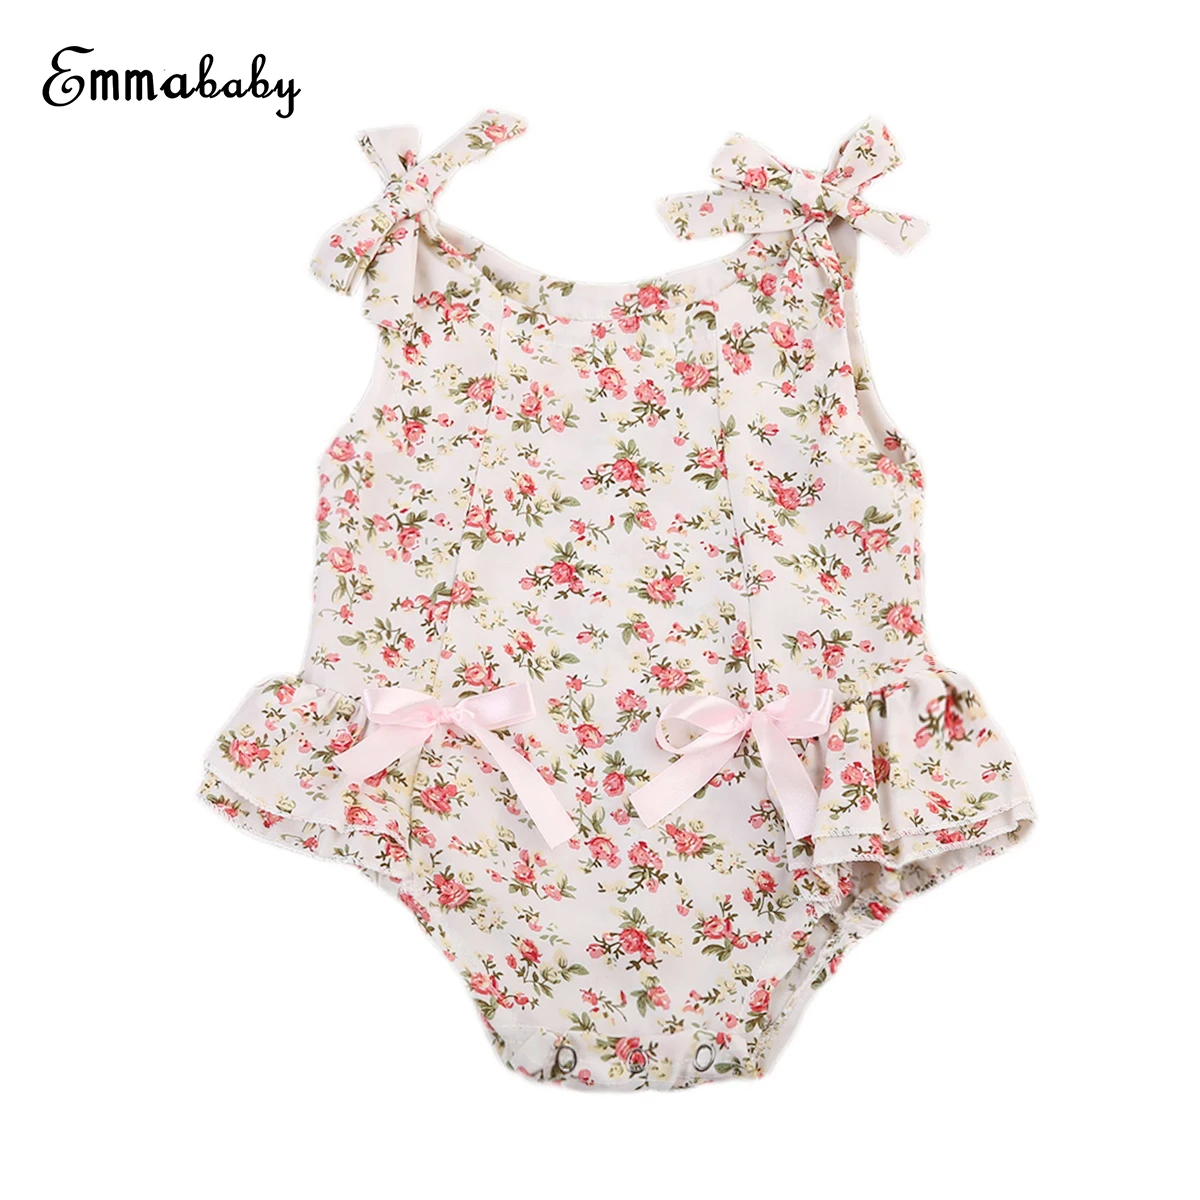 Cute Little Flower Clothing One Pieces Newborn Baby Girls Floral Bodysuit Jumpsuit Outfits Set Casual Clothes